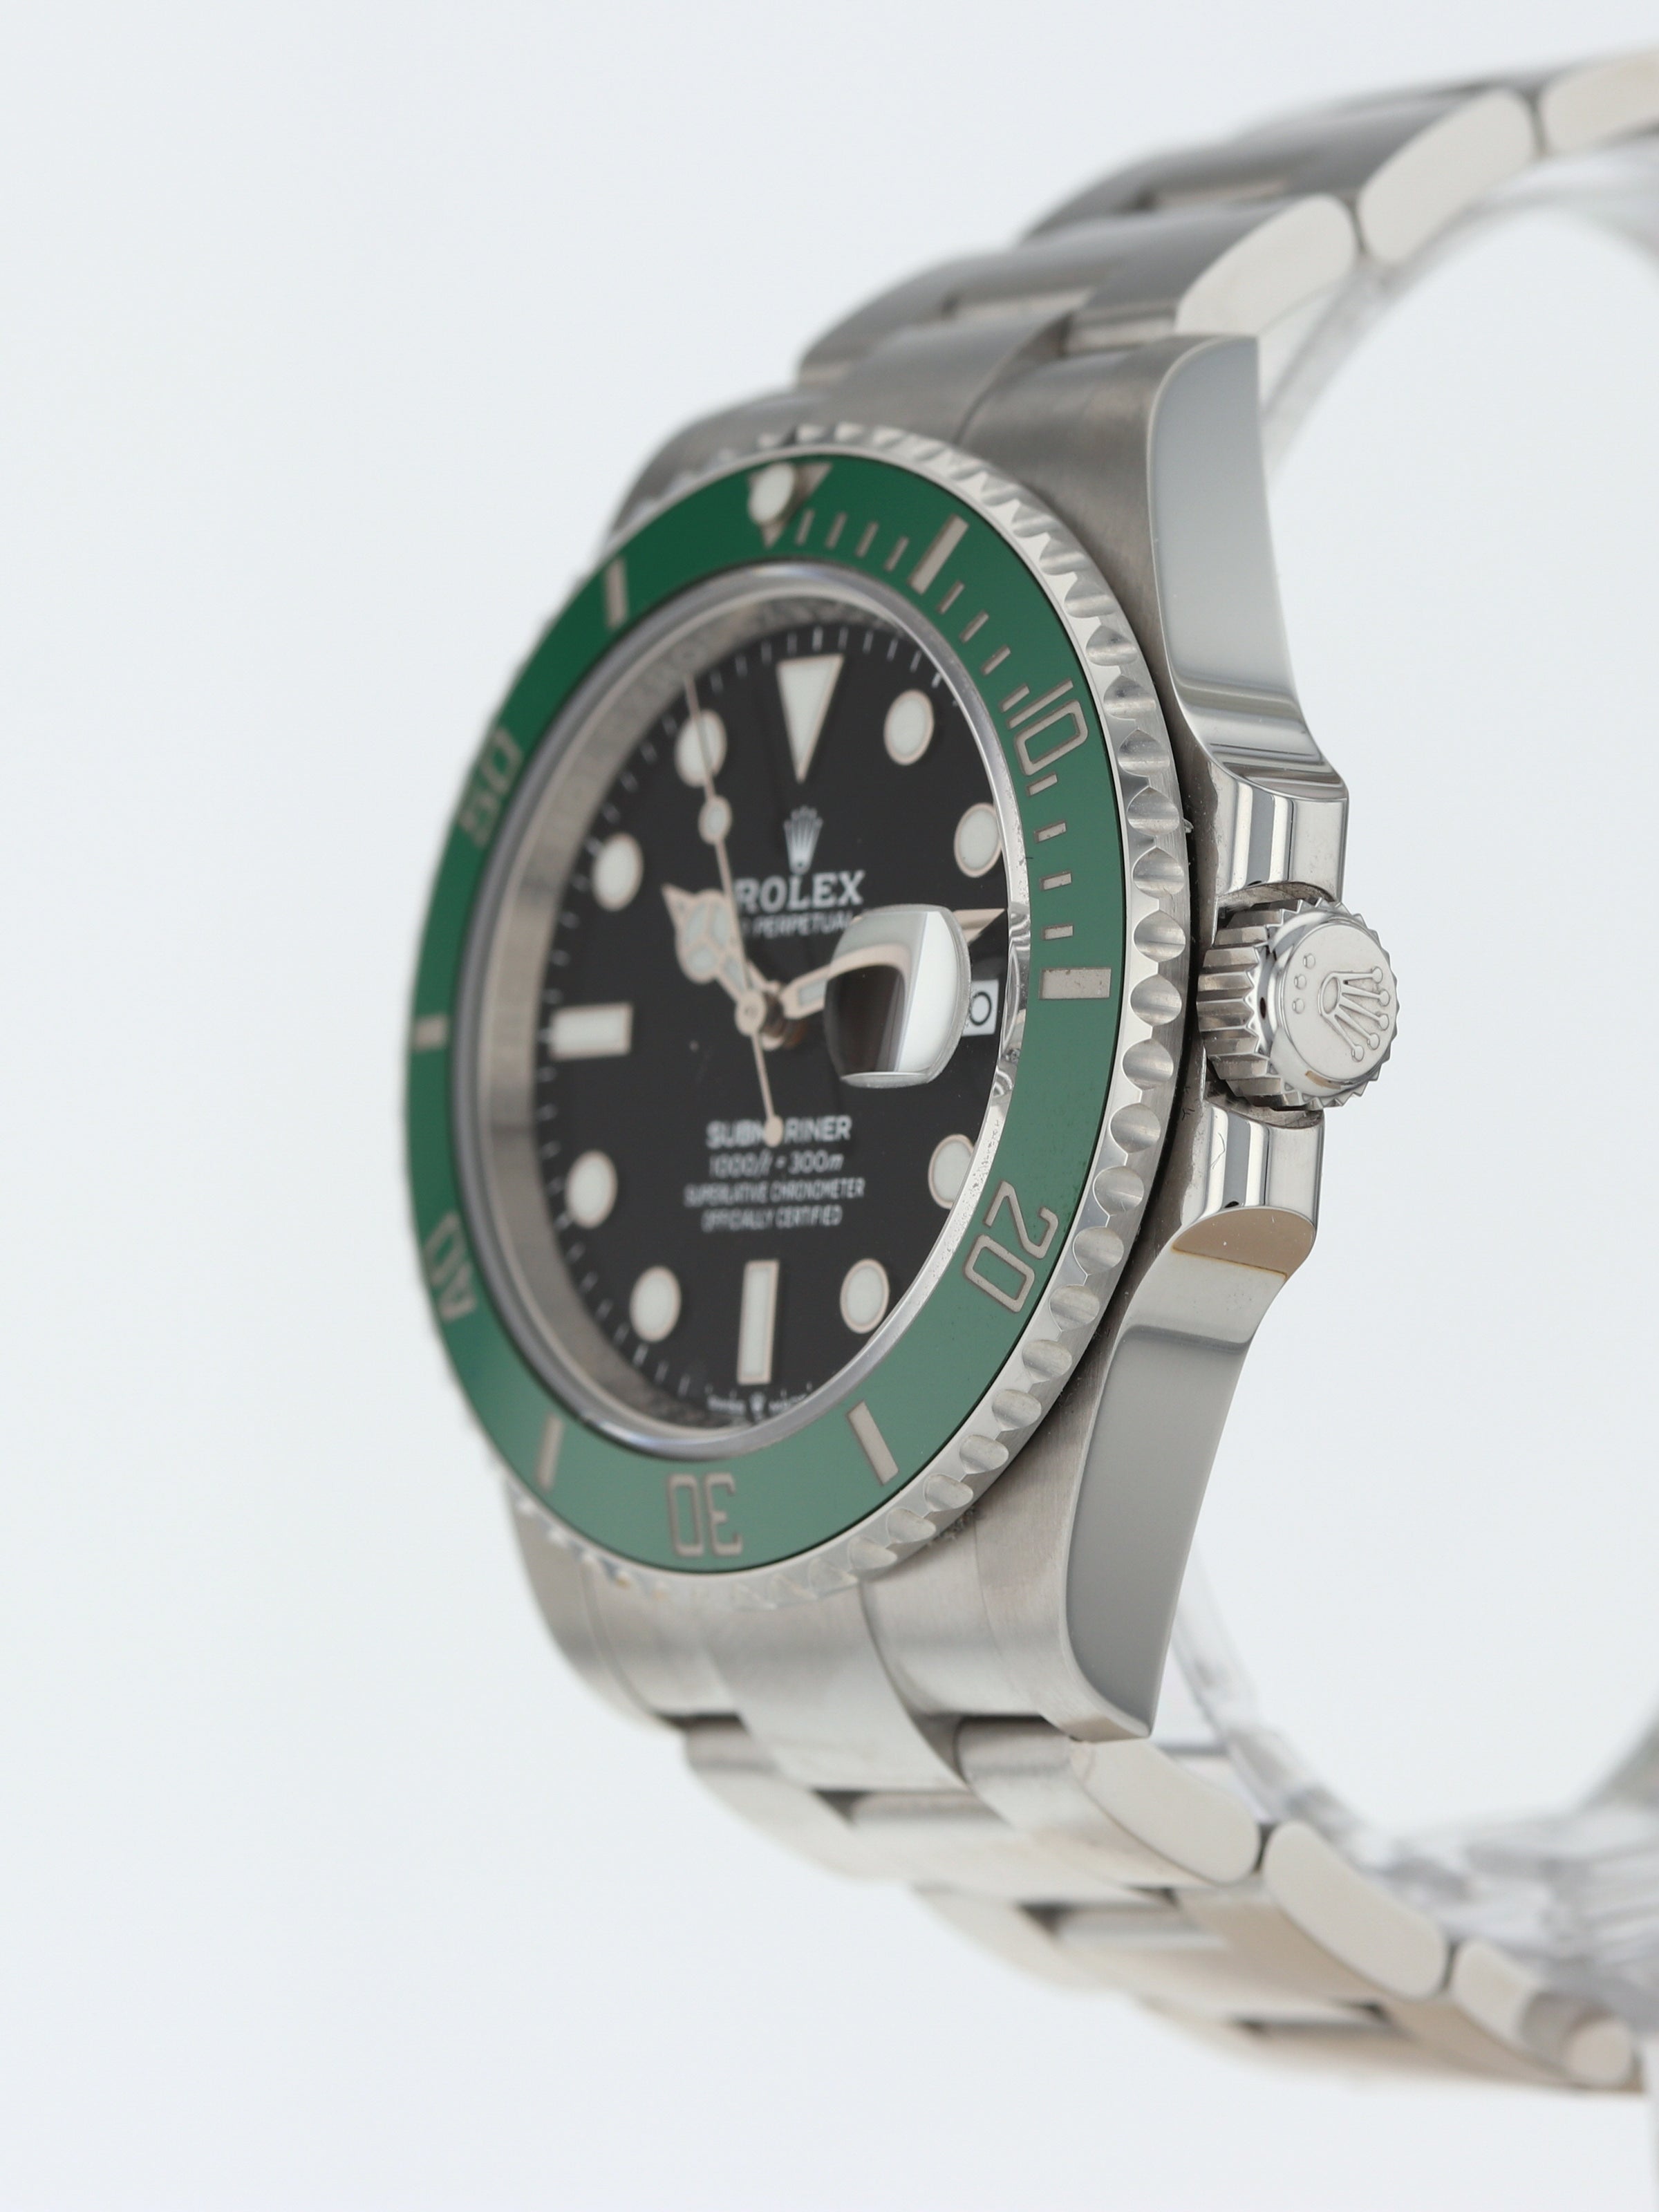 Rolex Submariner Kermit Ceramic 41mm Latest Model 2020 Black for Price  on request for sale from a Trusted Seller on Chrono24